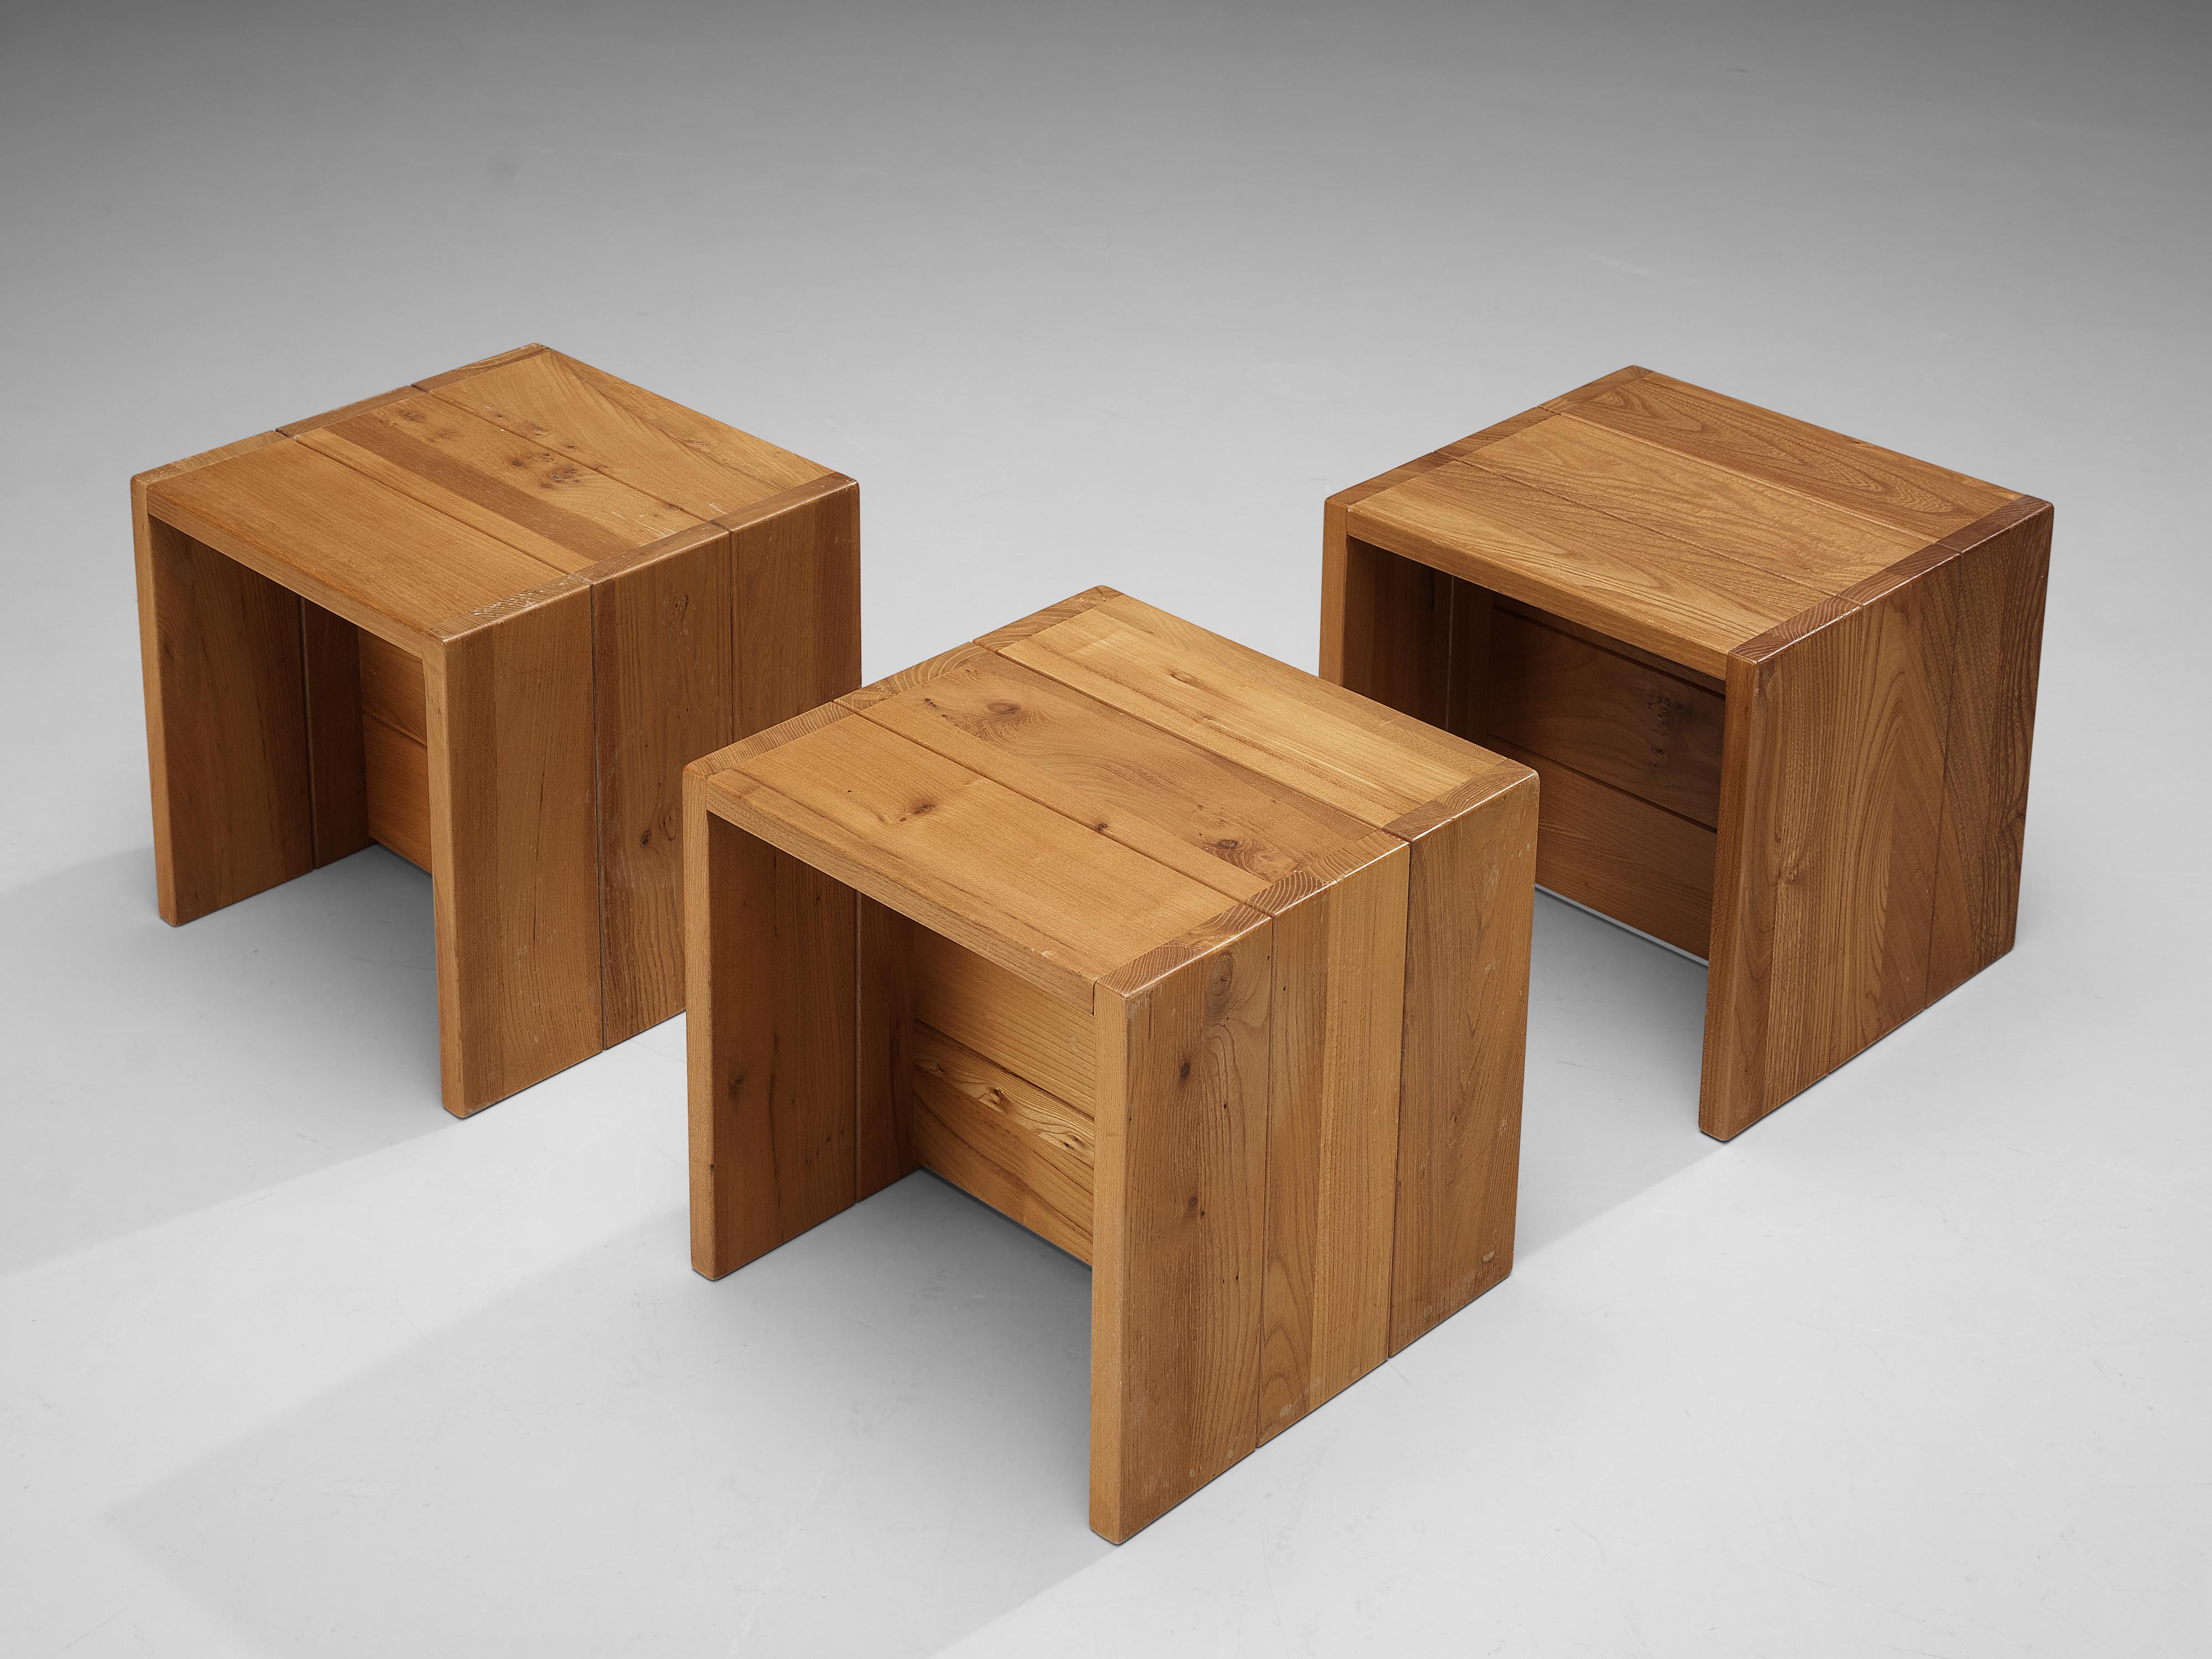 Maison Regain, set of three side tables, solid elm, France, 1970s

Versatile and playful set of side tables that can be place in different positions due to its cubical shape. The design features clean lines and a sturdy overall appearance. The